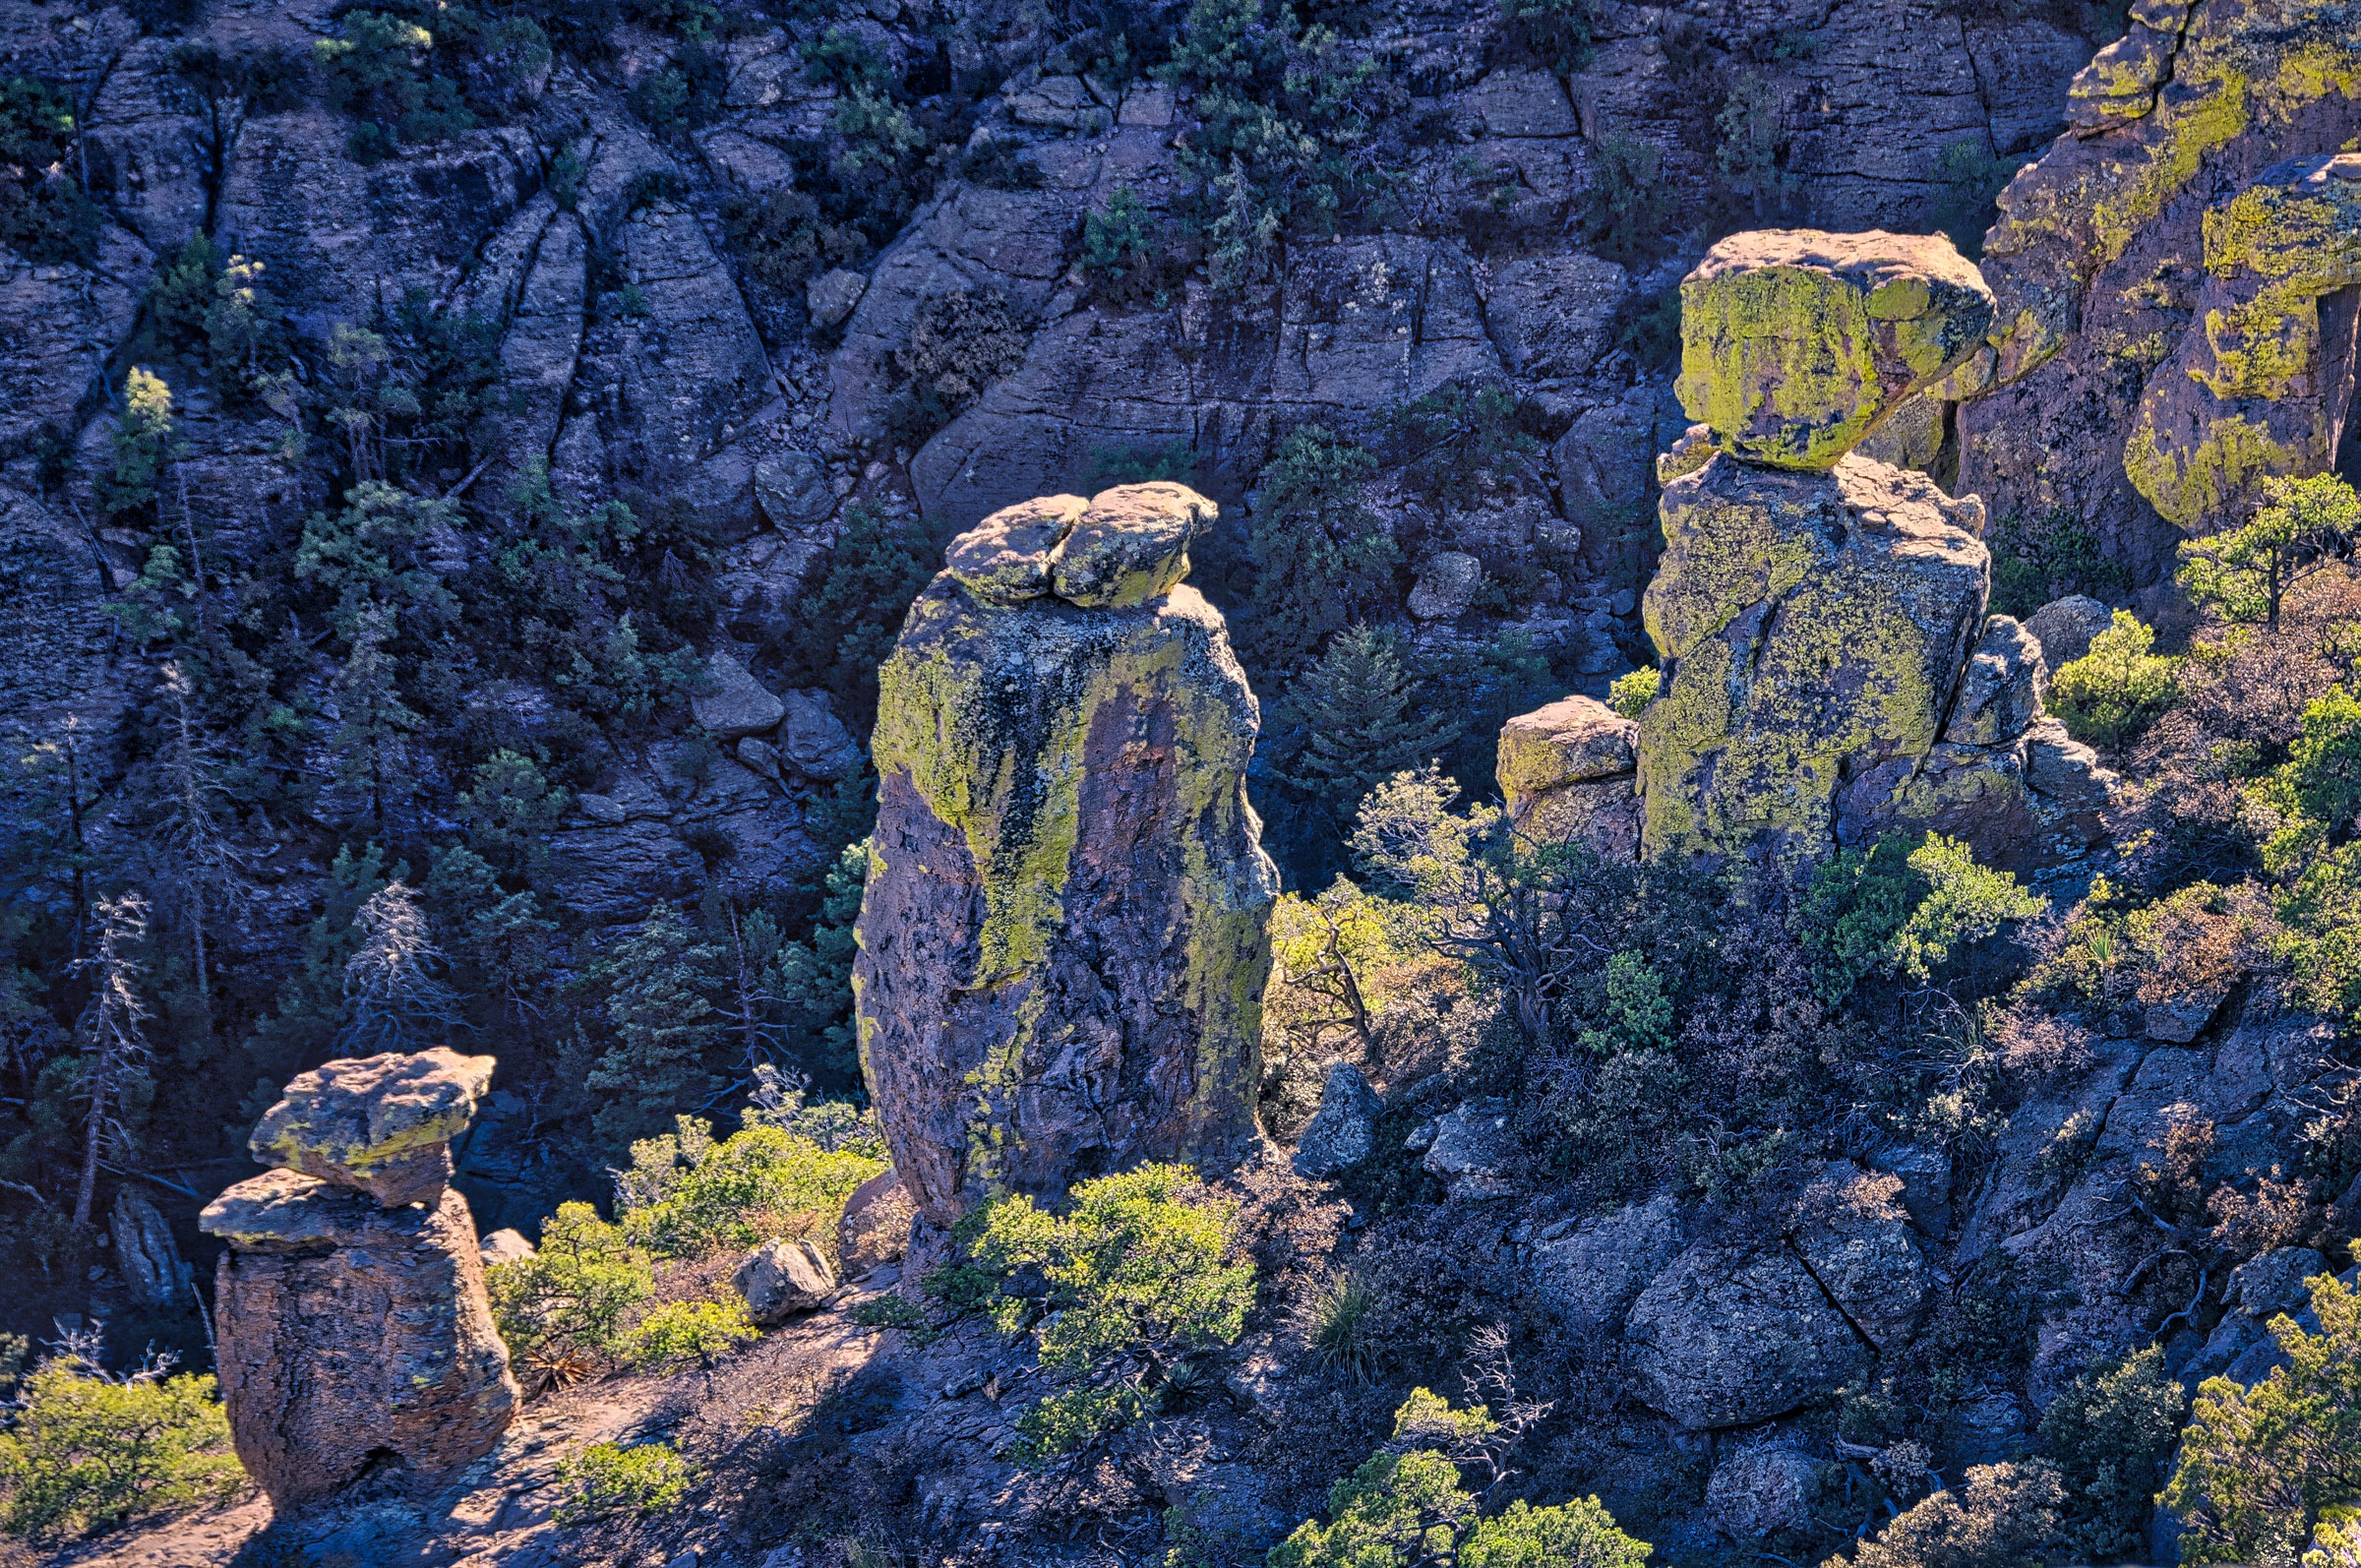 Canyon lined with rock columns north of Massai Point in Chiricahua National Monument. The columns are formed of Rhyolite Canyon Tuff.